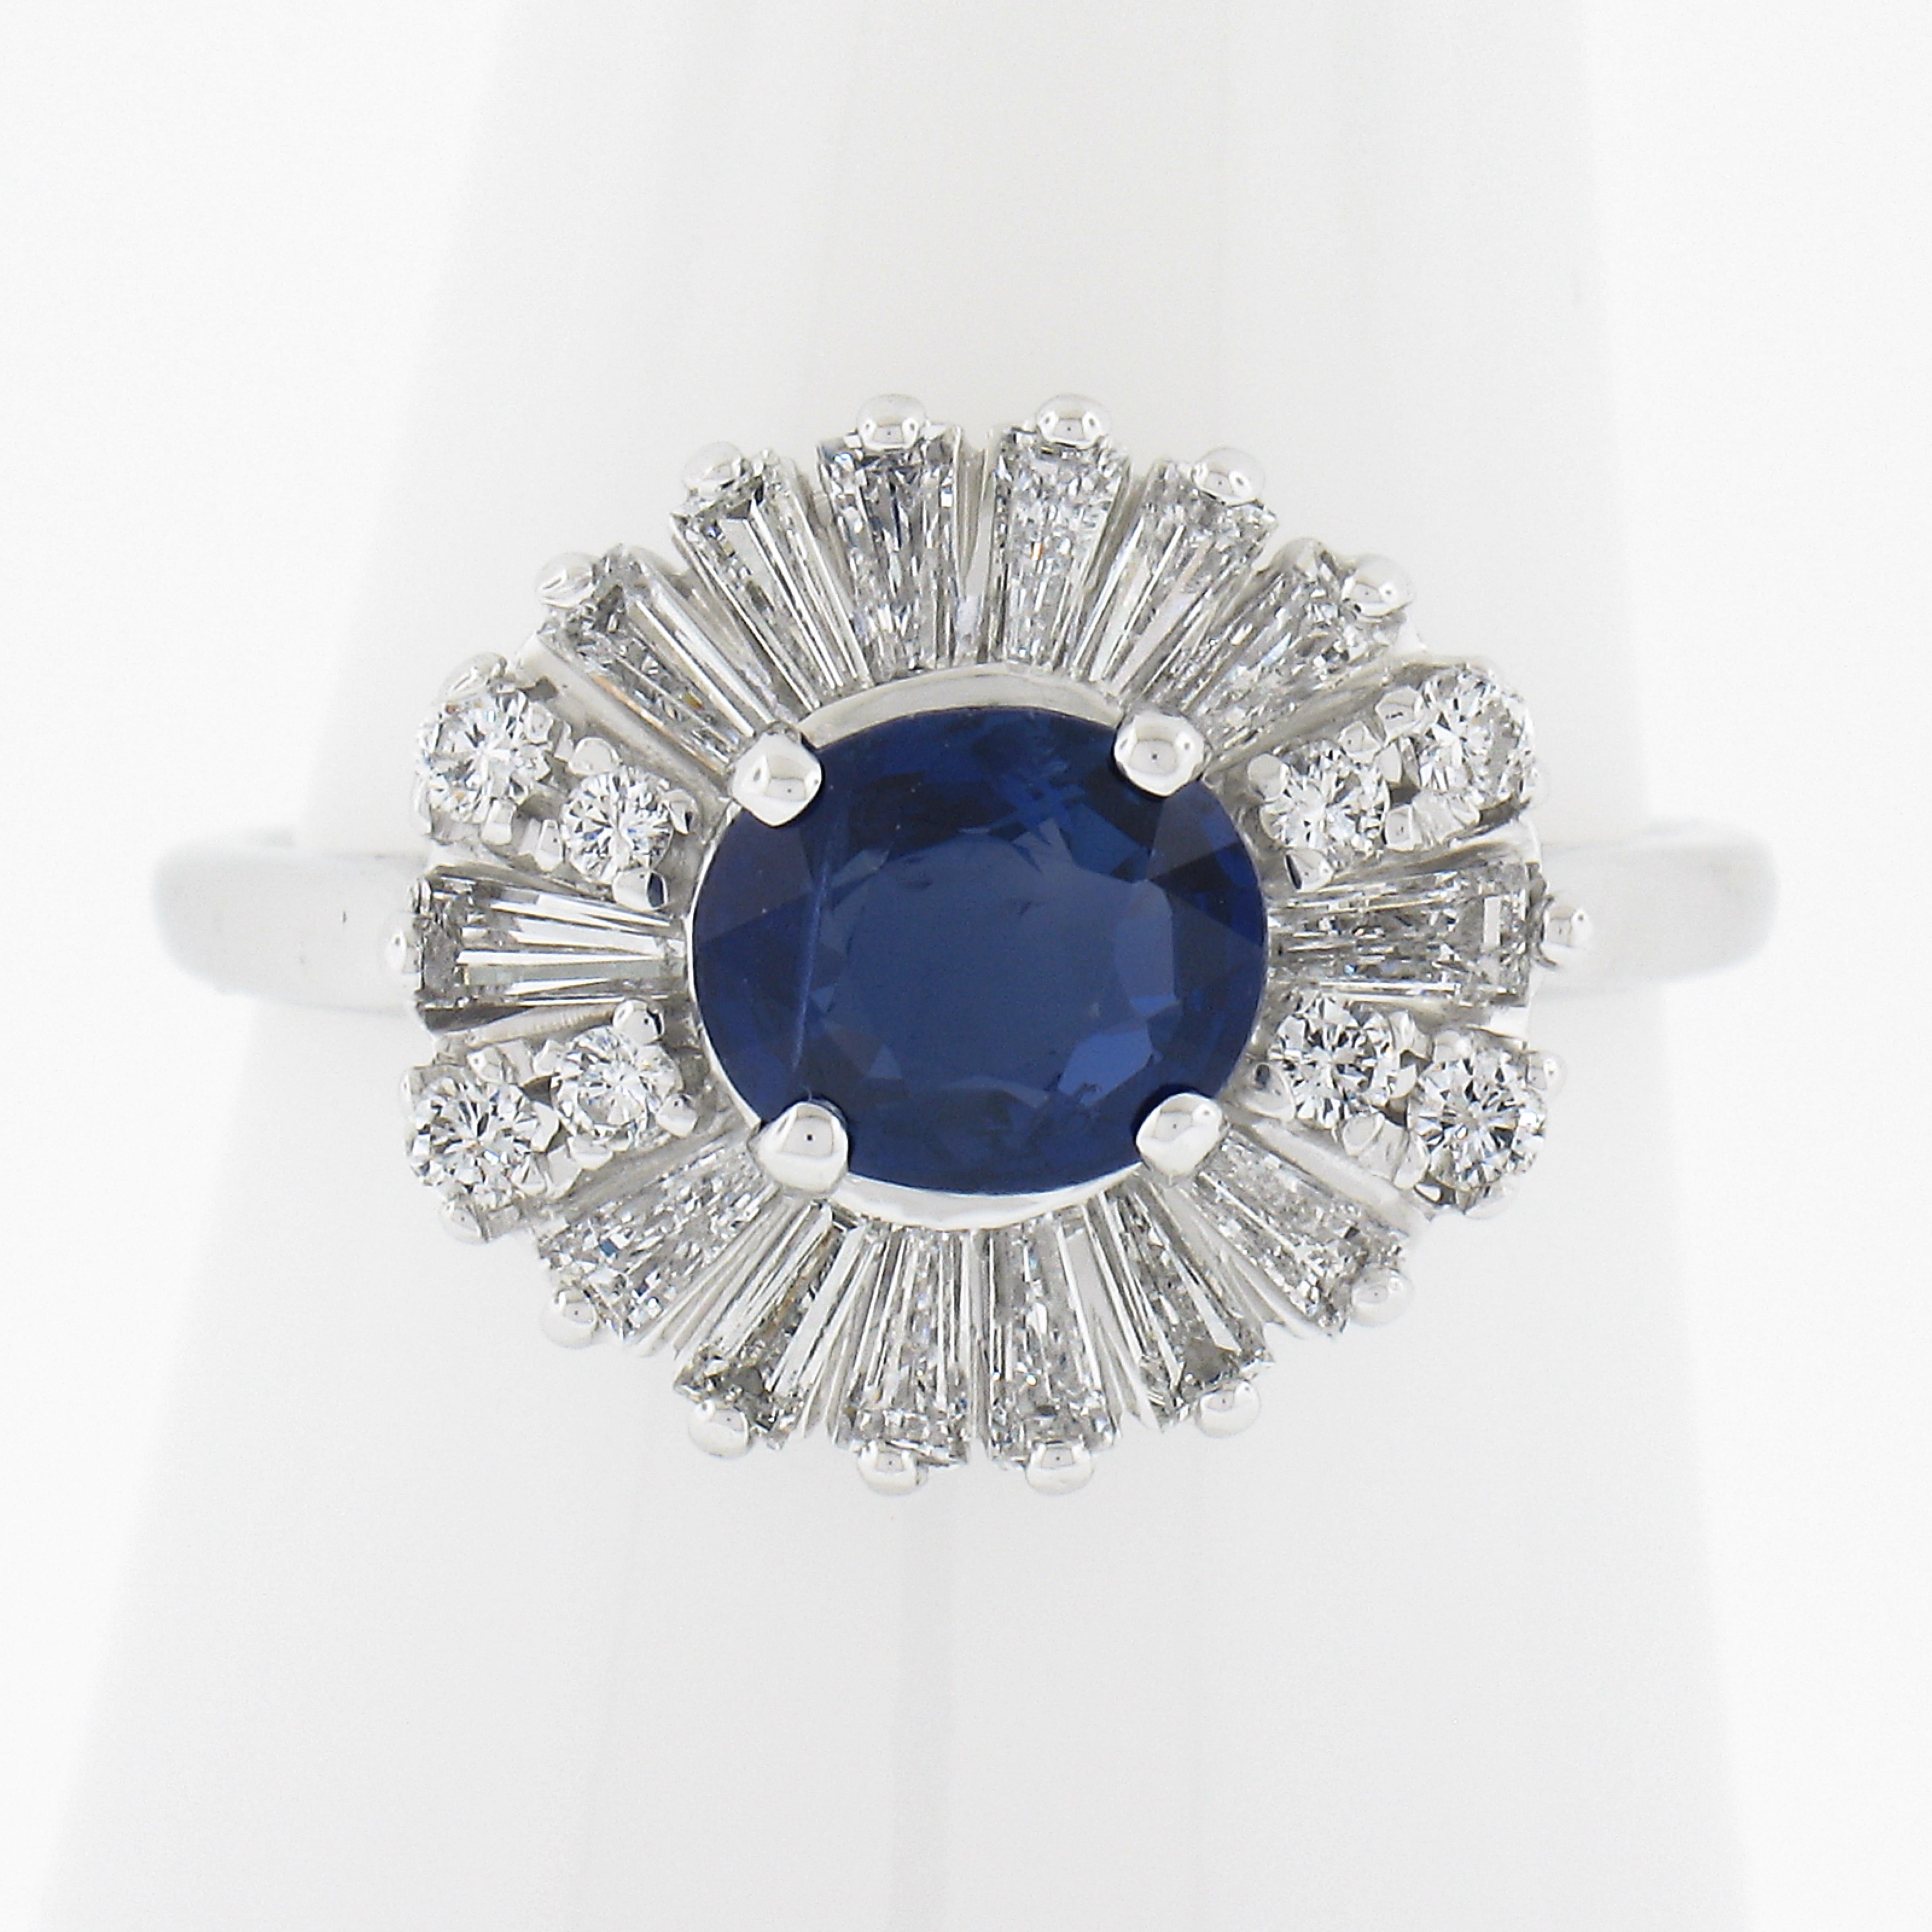 --Stone(s):--
(1) Natural Genuine Sapphire - Oval Brilliant Cut - Royal Blue Color - Burma - NO HEAT - 1.42ct (exact - certified)
** See Certification Details Below For More Info **
(14) Natural Genuine Diamonds - Tapered Baguette Cut - Prong Set -